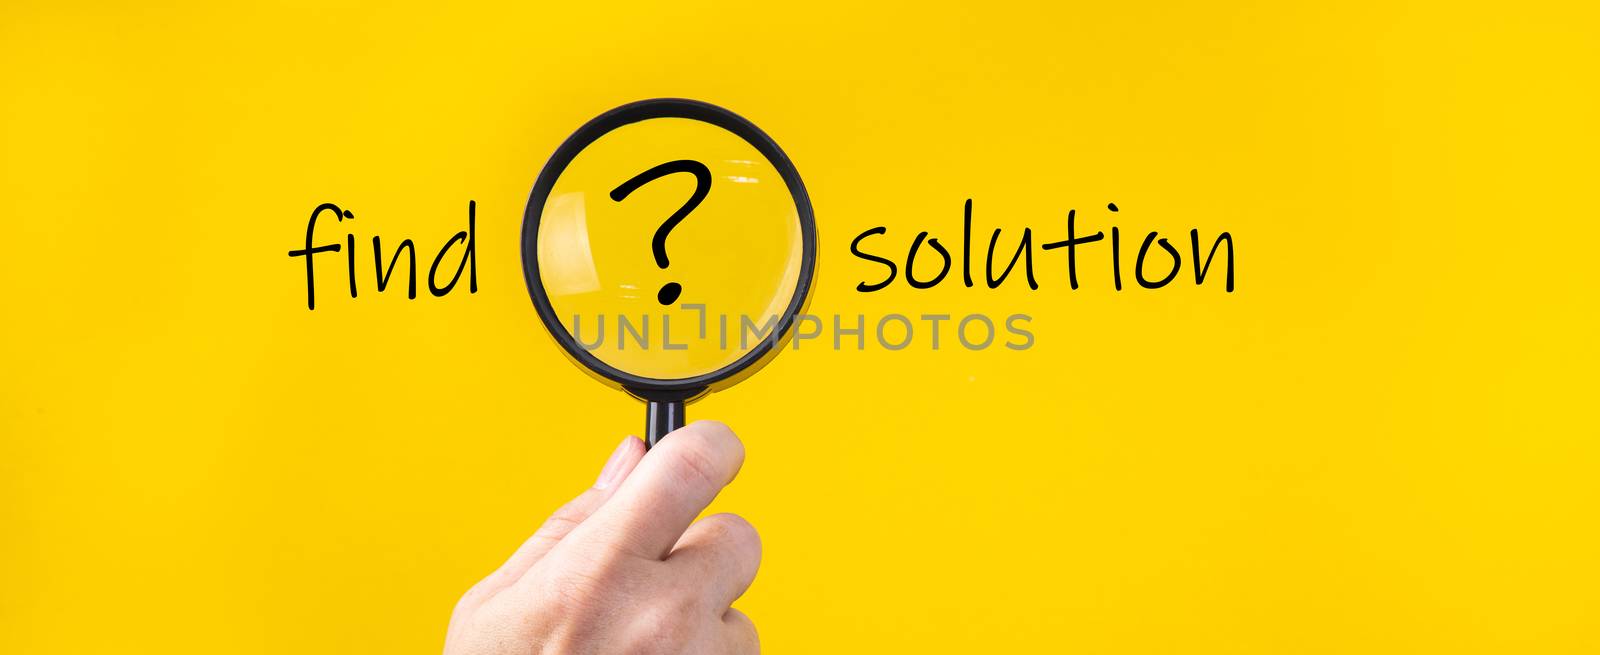 Magnifying glass with QUESTION MARK in focus on yellow backgroun by tehcheesiong